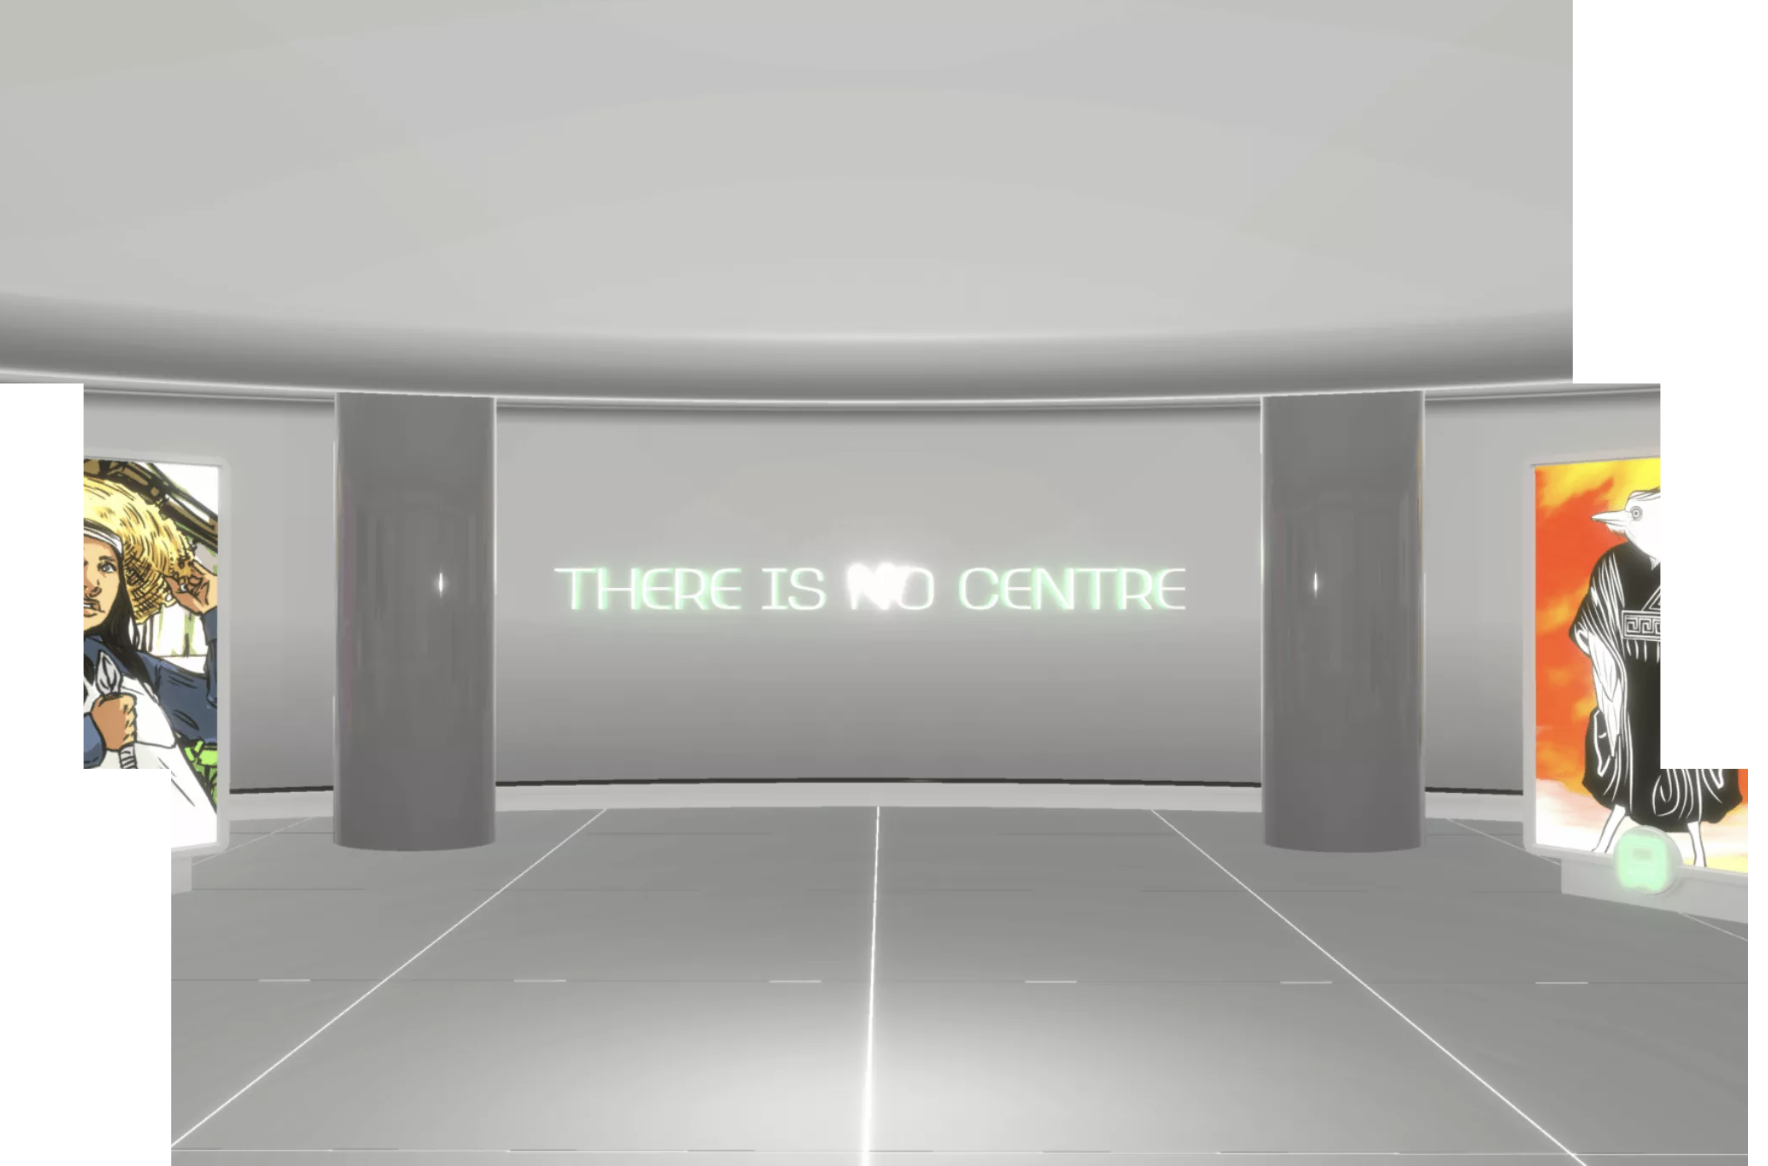 THERE IS NO CENTRE